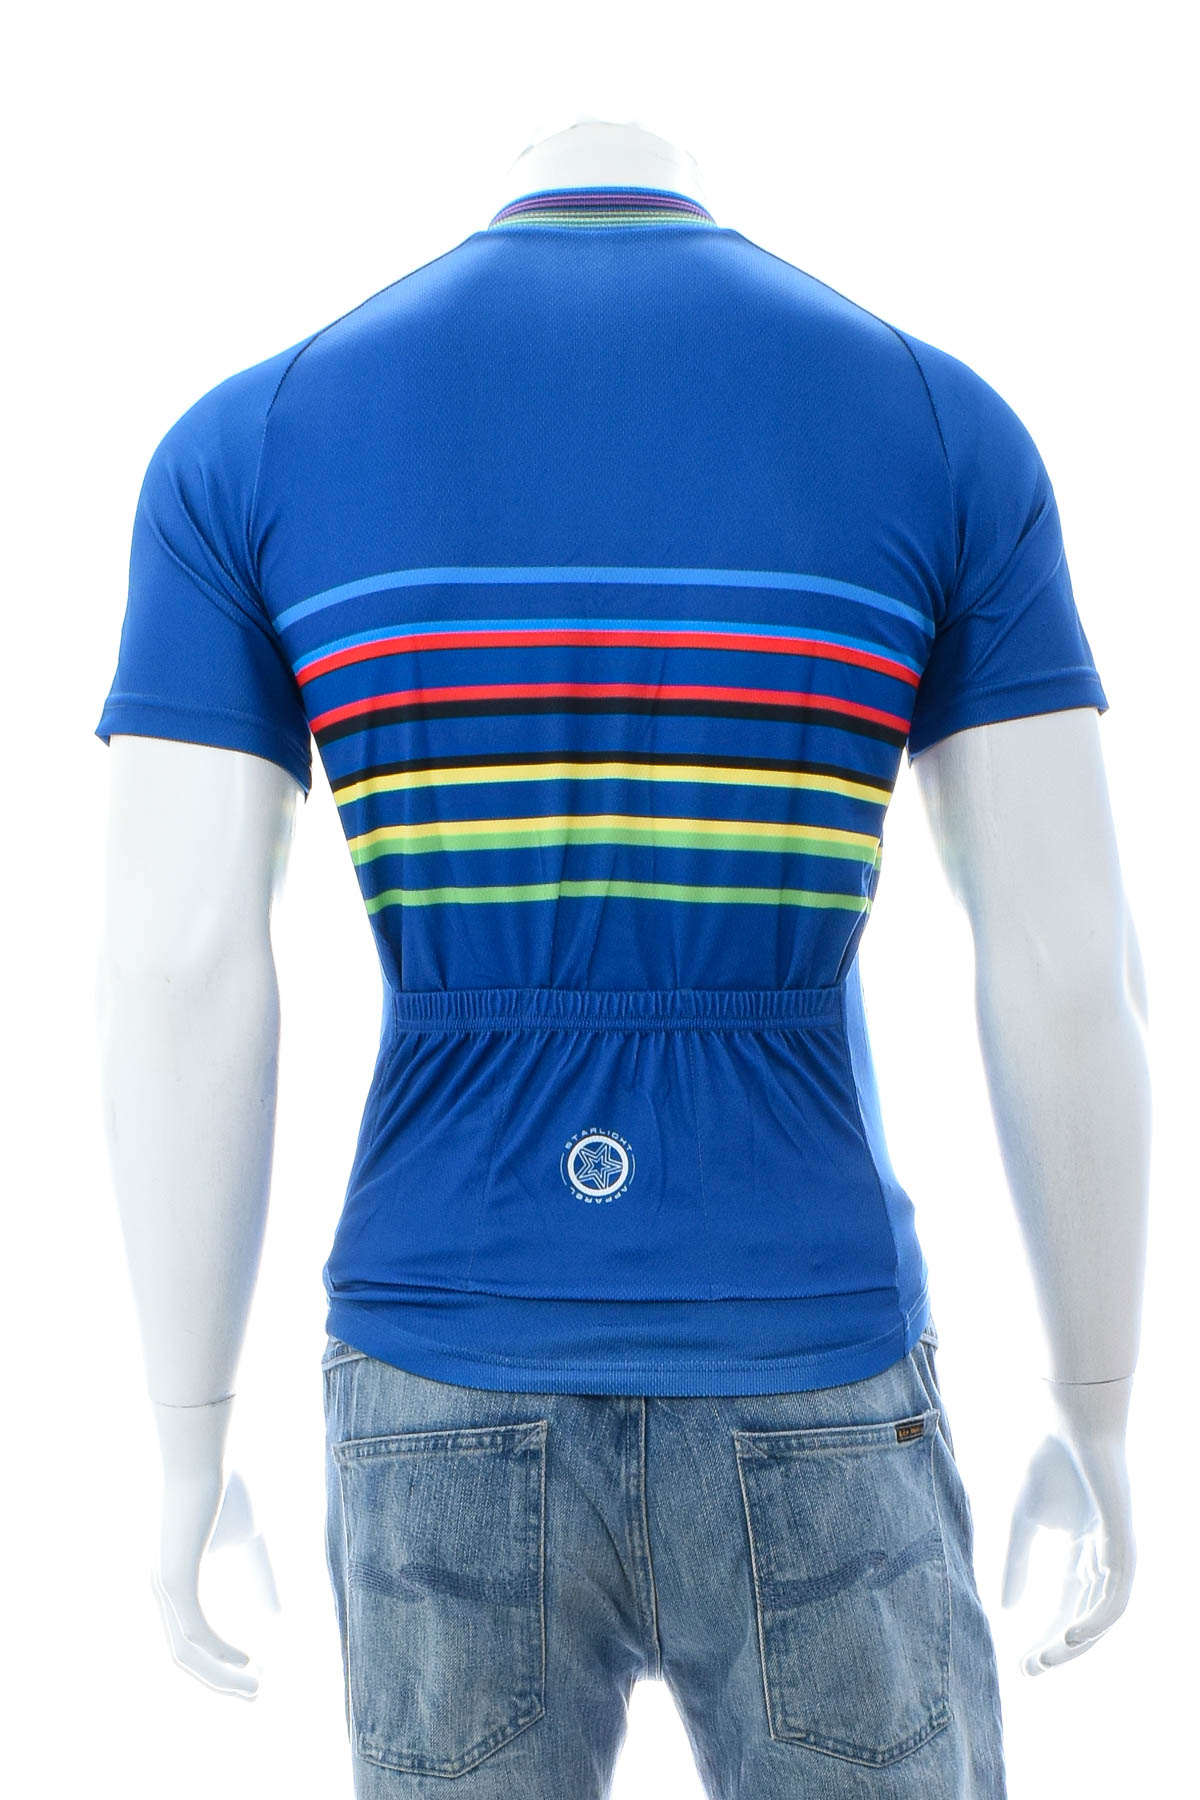 Male sports top for cycling - STARLIGHT - 1